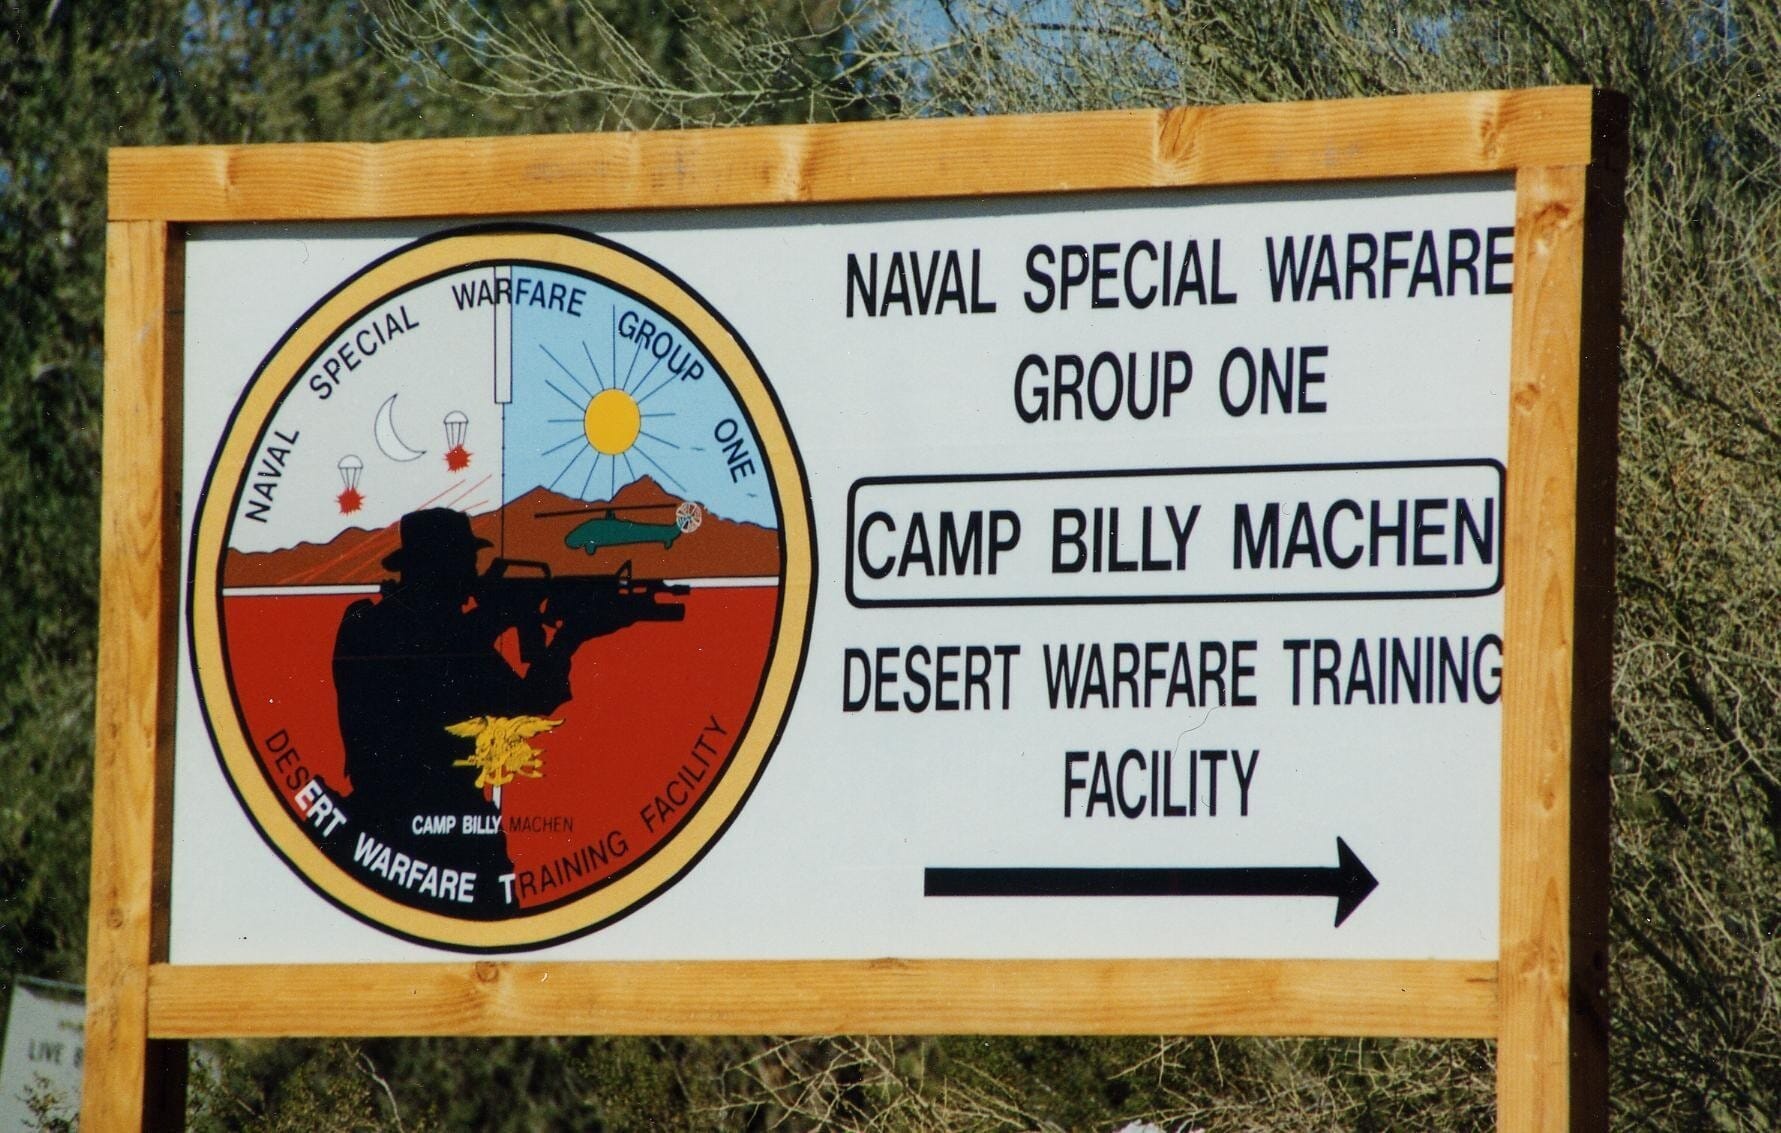 Slab City, California: Military Bases, UFOs And Things That Go BOOM!